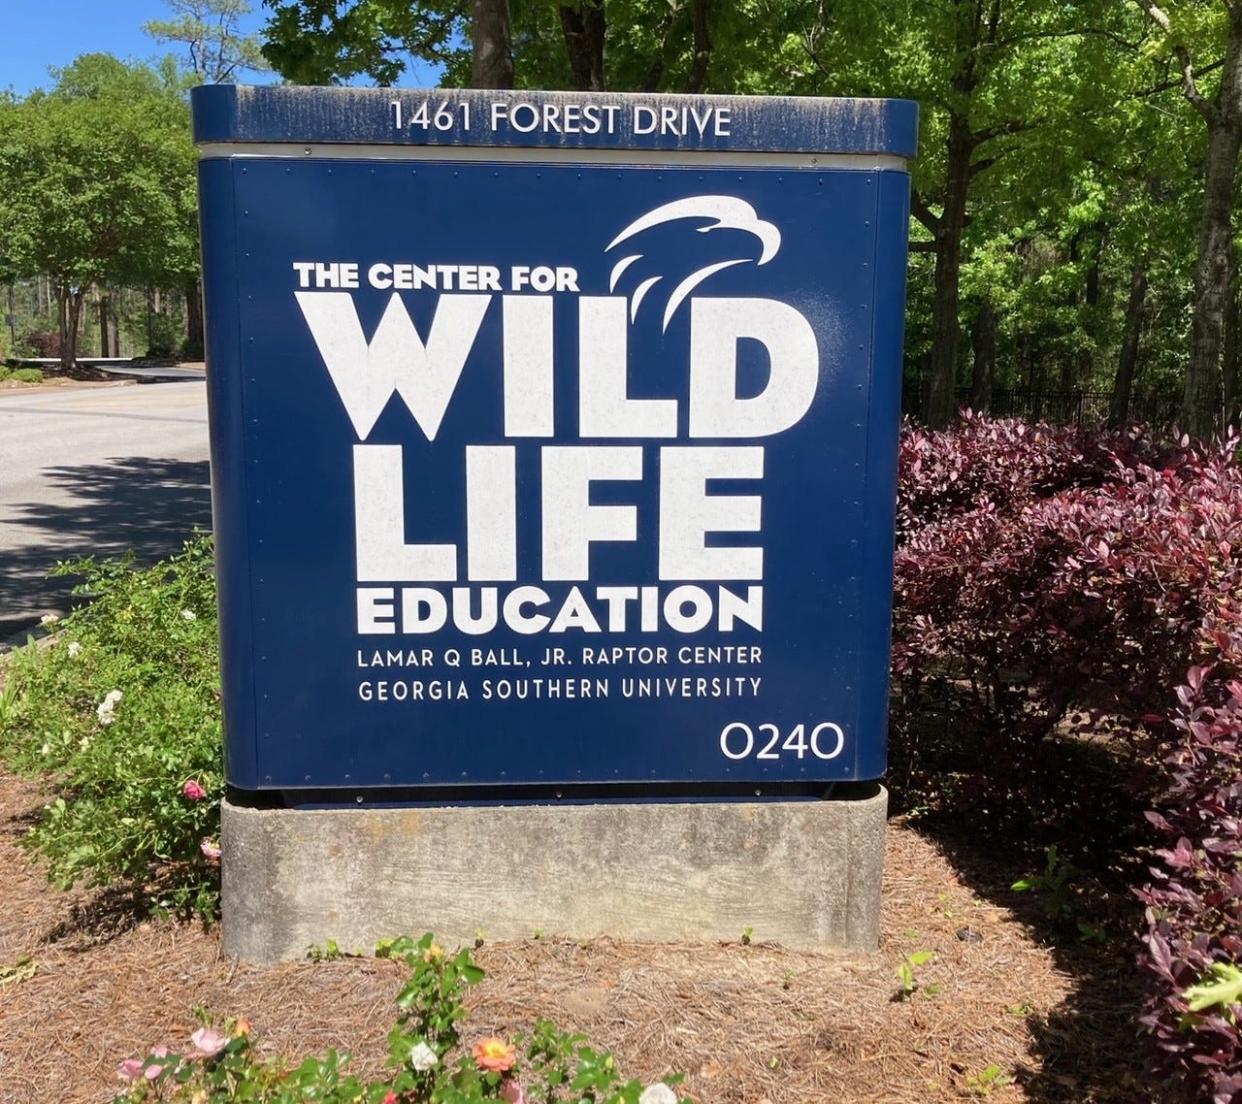 Arriving at the Center for Wildlife Education on the Georgia Southern University campus in Statesboro, Georgia.